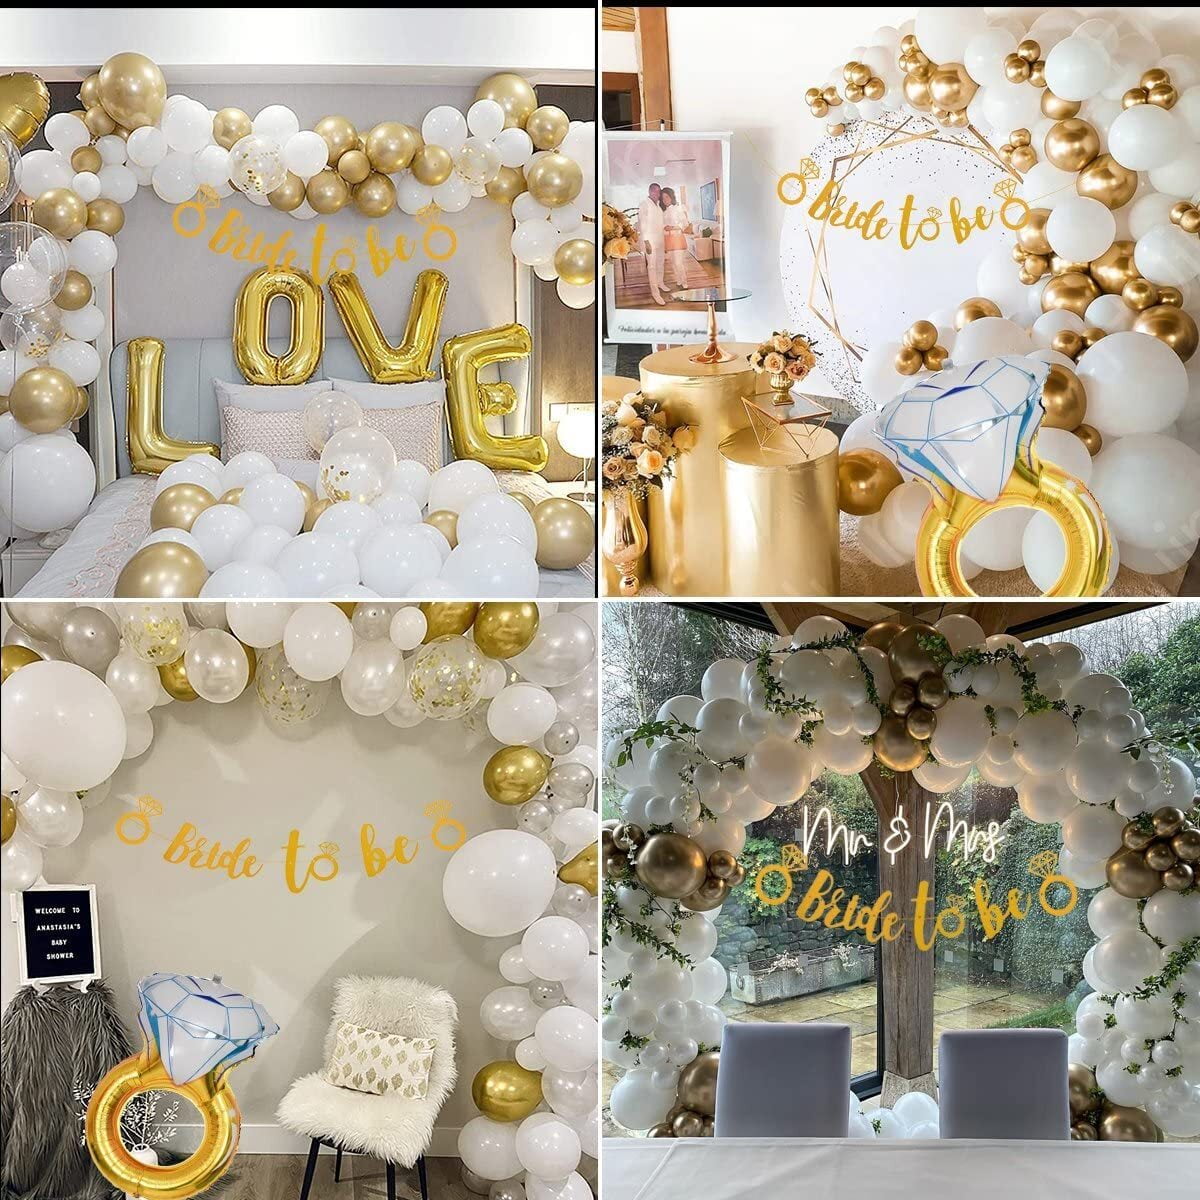 Yansion Bachelorette Party Decorations - Bridal Shower Decorations Set Including Bride to Be Banner Balloon, Rose Gold Balloons, Confetti Balloons